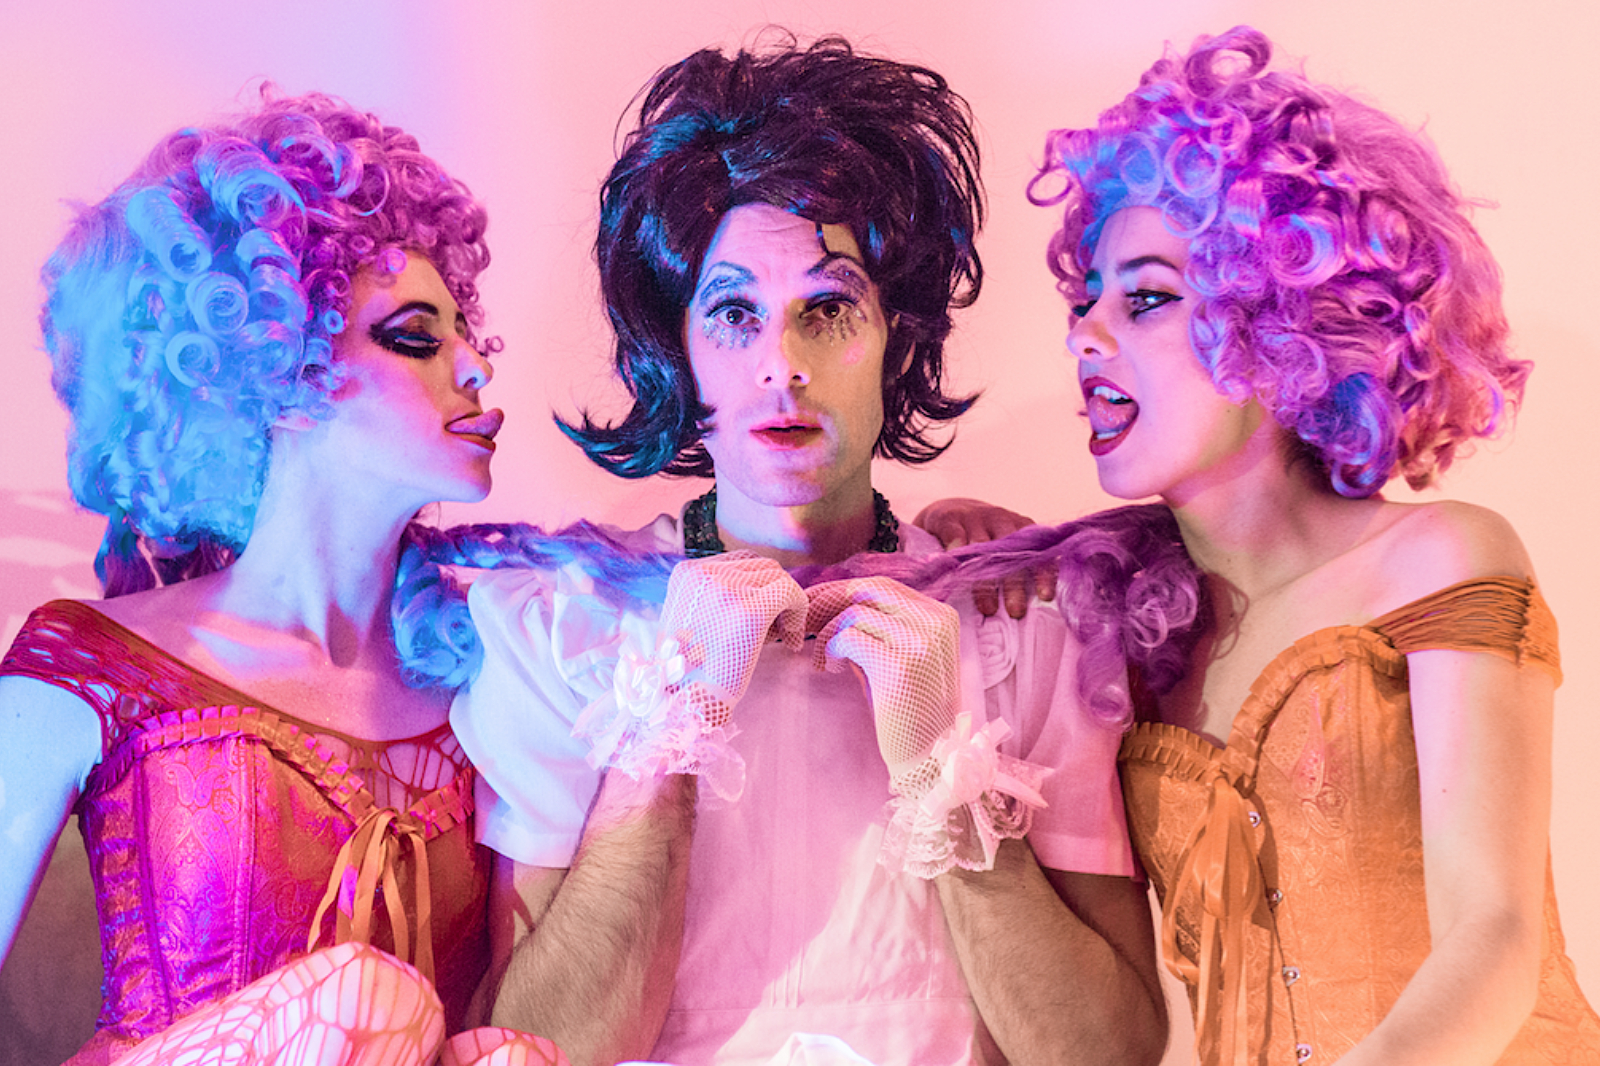 Of Montreal bring the sax appeal with 'my fair lady'